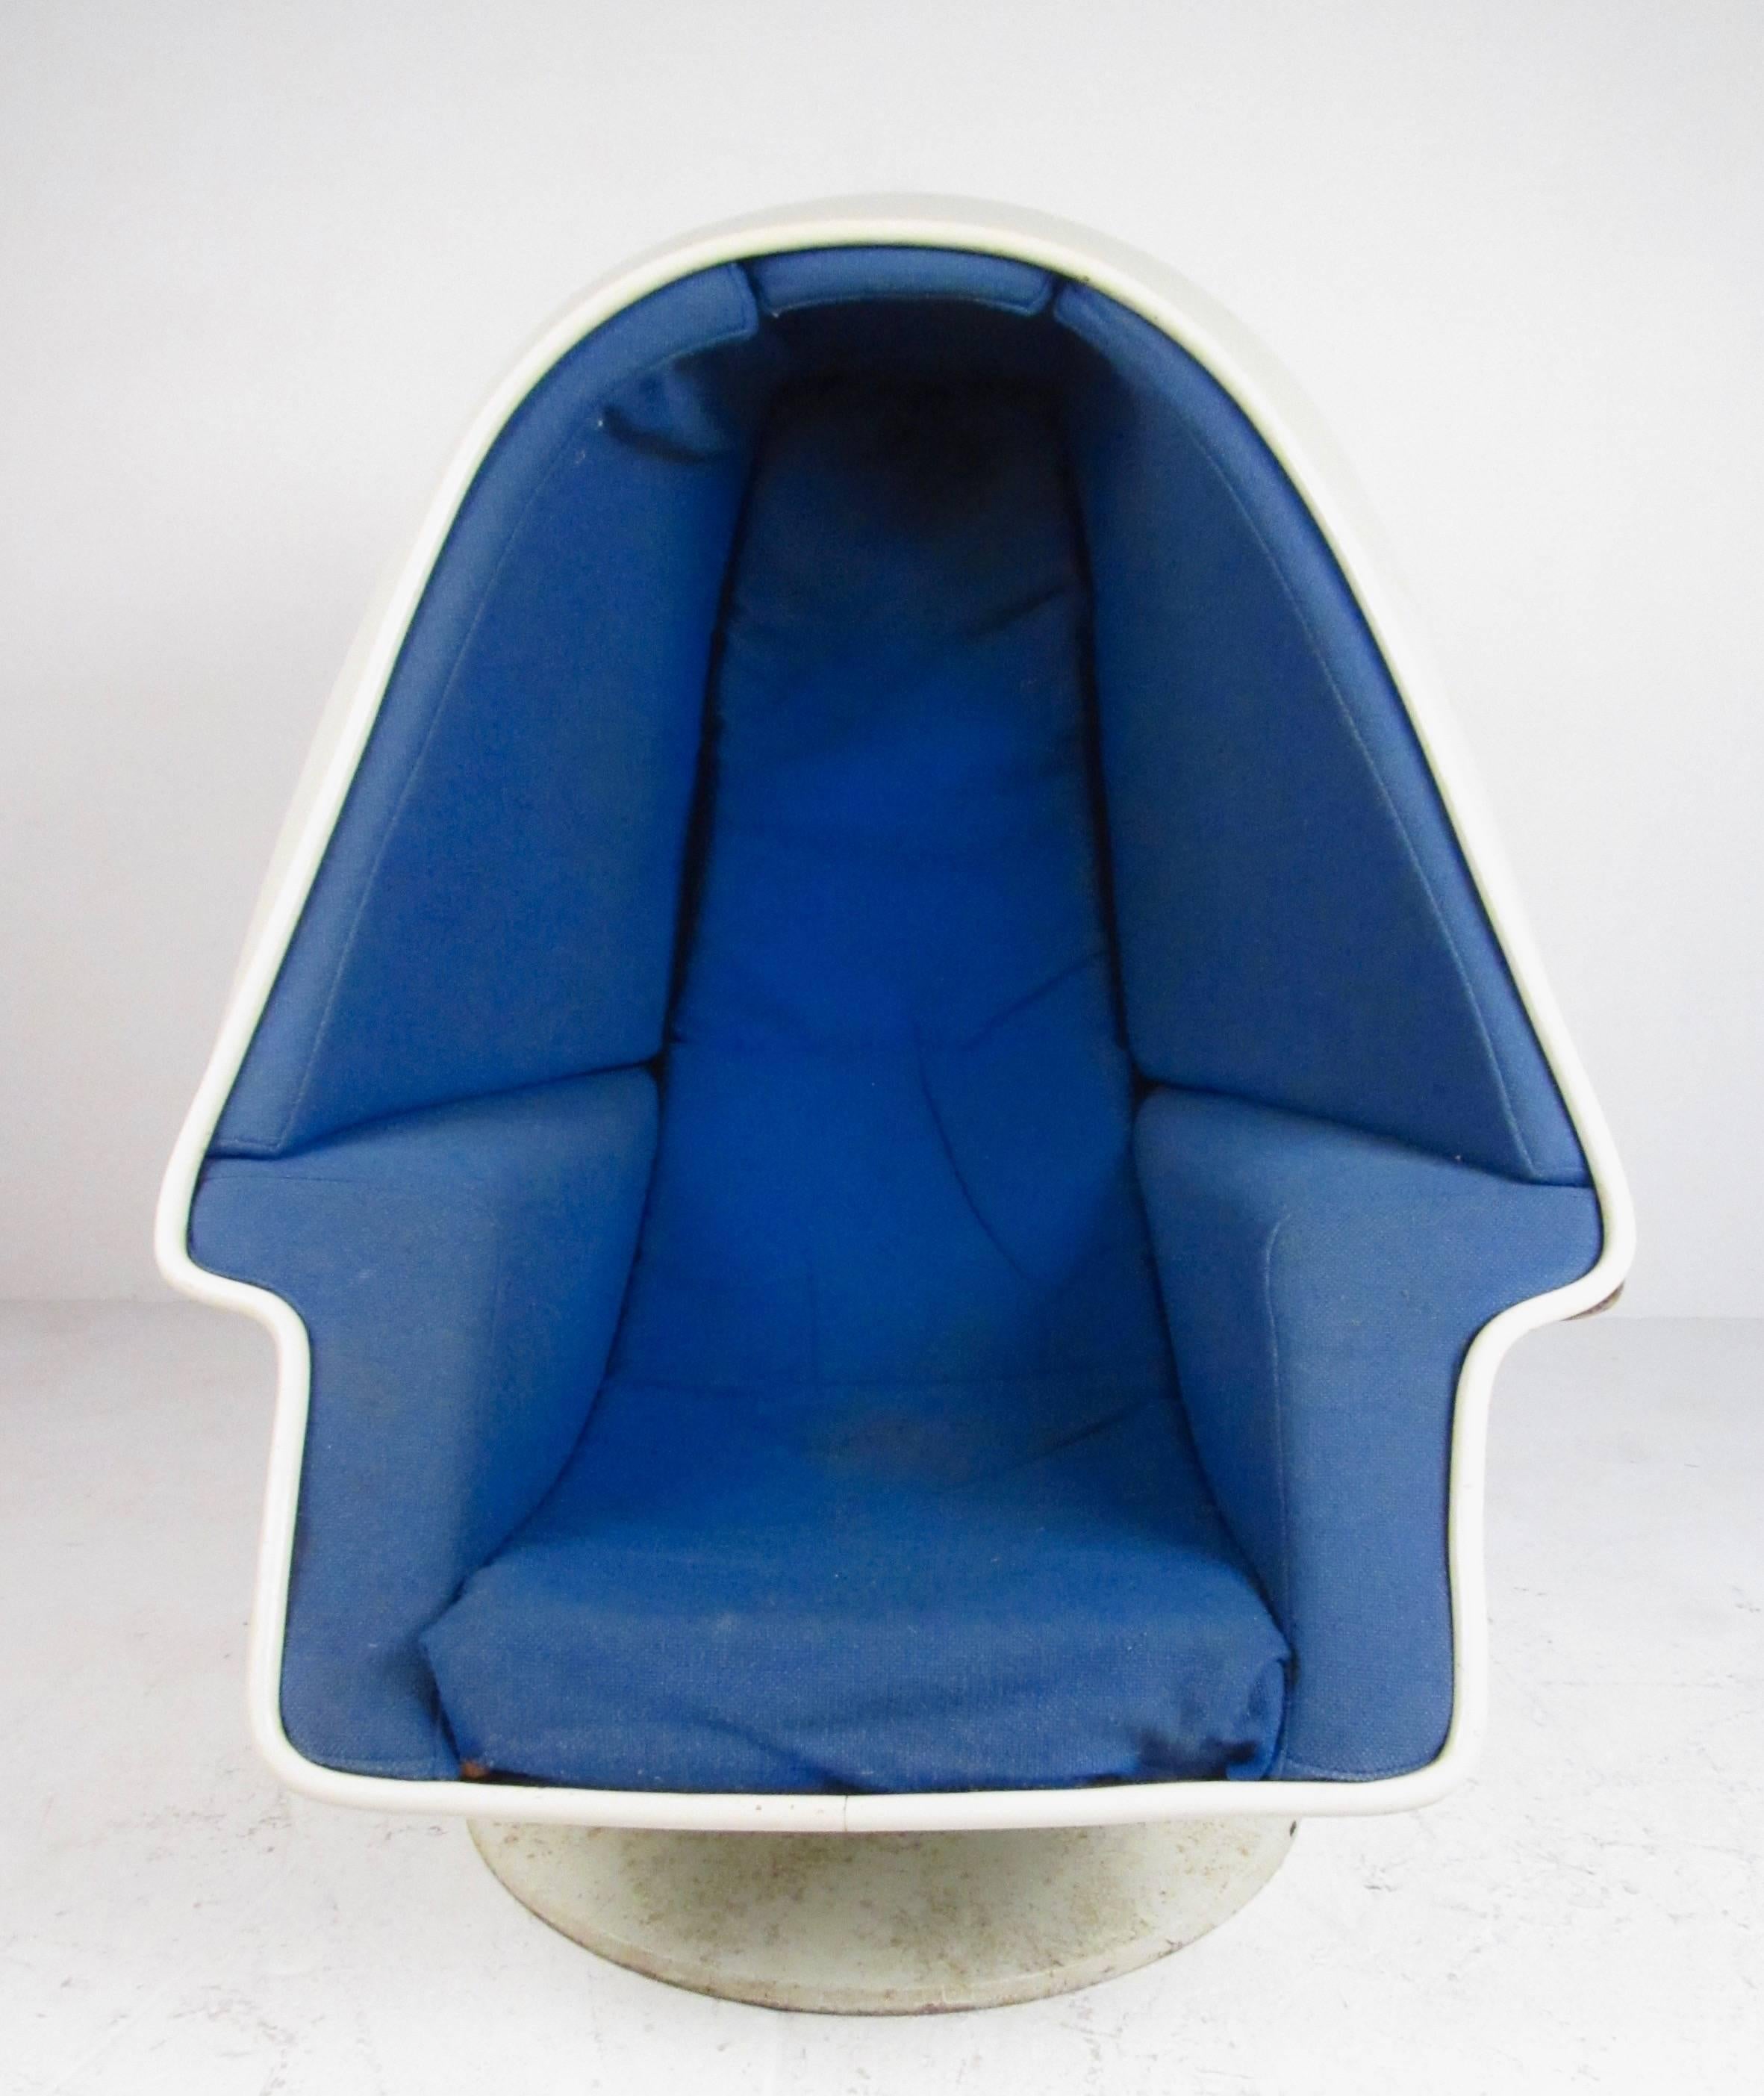 This unique retro lounge chair by Lee Co features fiberglass egg-style design with comfortable upholstered interior. Iconic Mid-Century Modern style similar to those by Eero Aarnio and Thor Larsen, making this vintage chair an impressive addition to